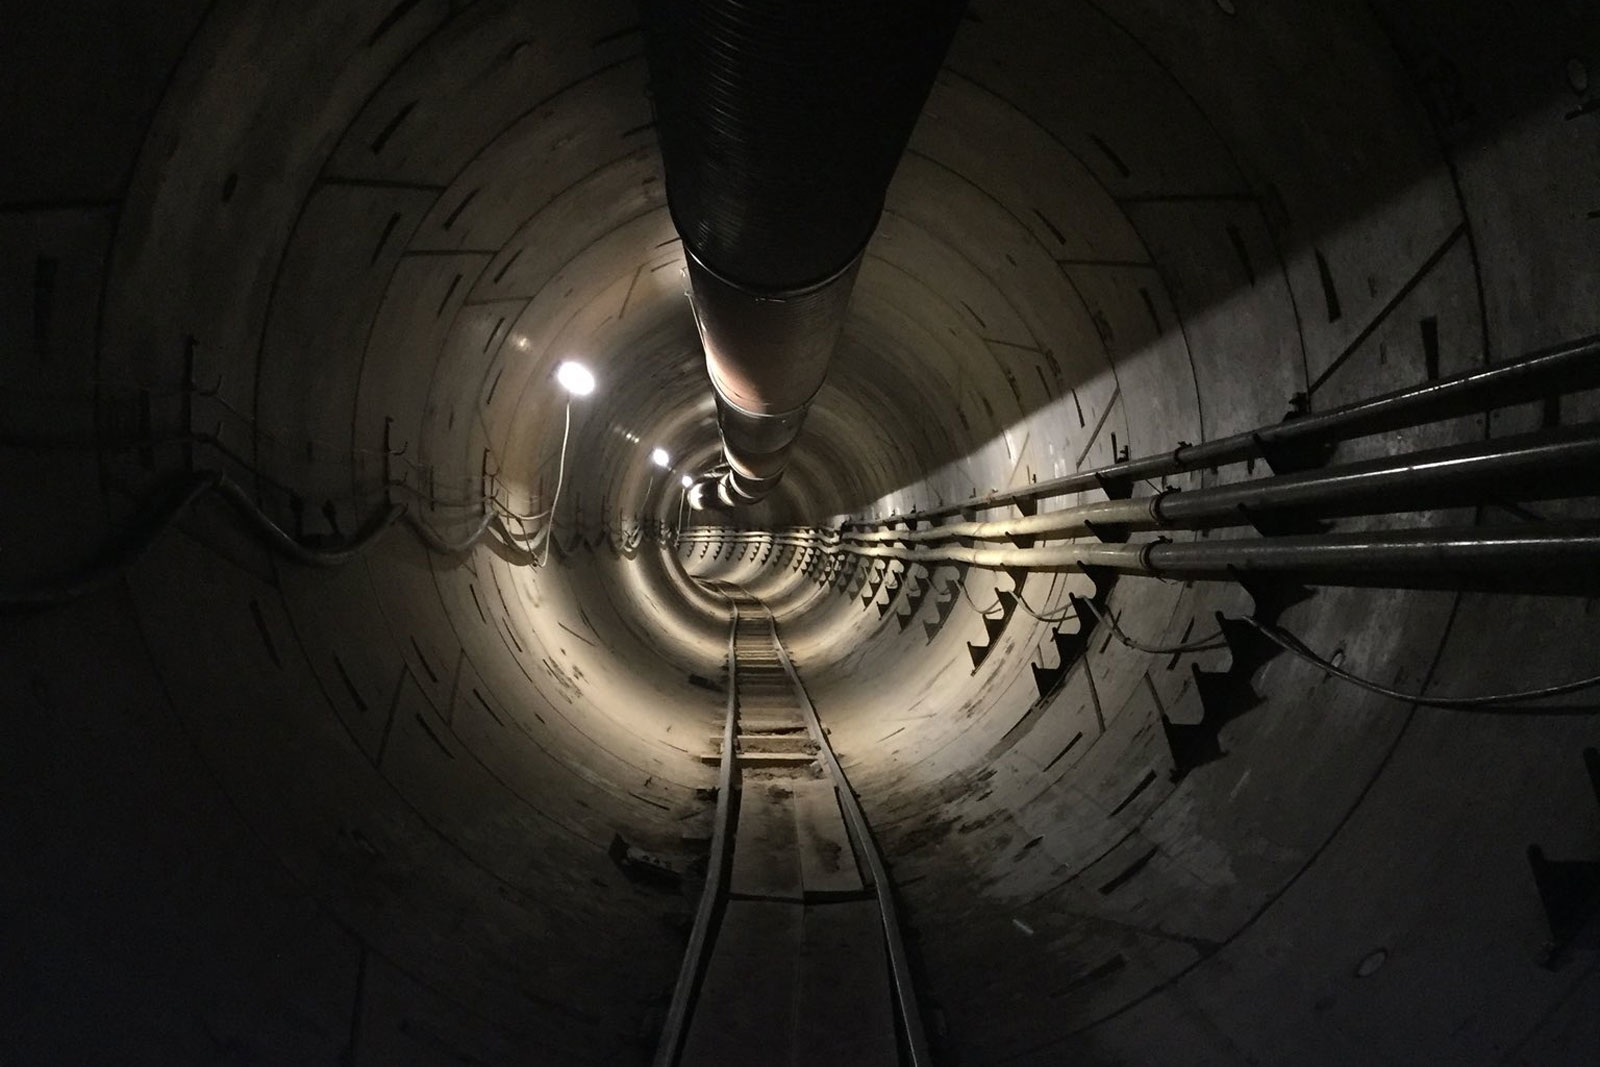 Elon Musk offers peek at traffic-dodging tunnel in Los Angeles | DeviceDaily.com